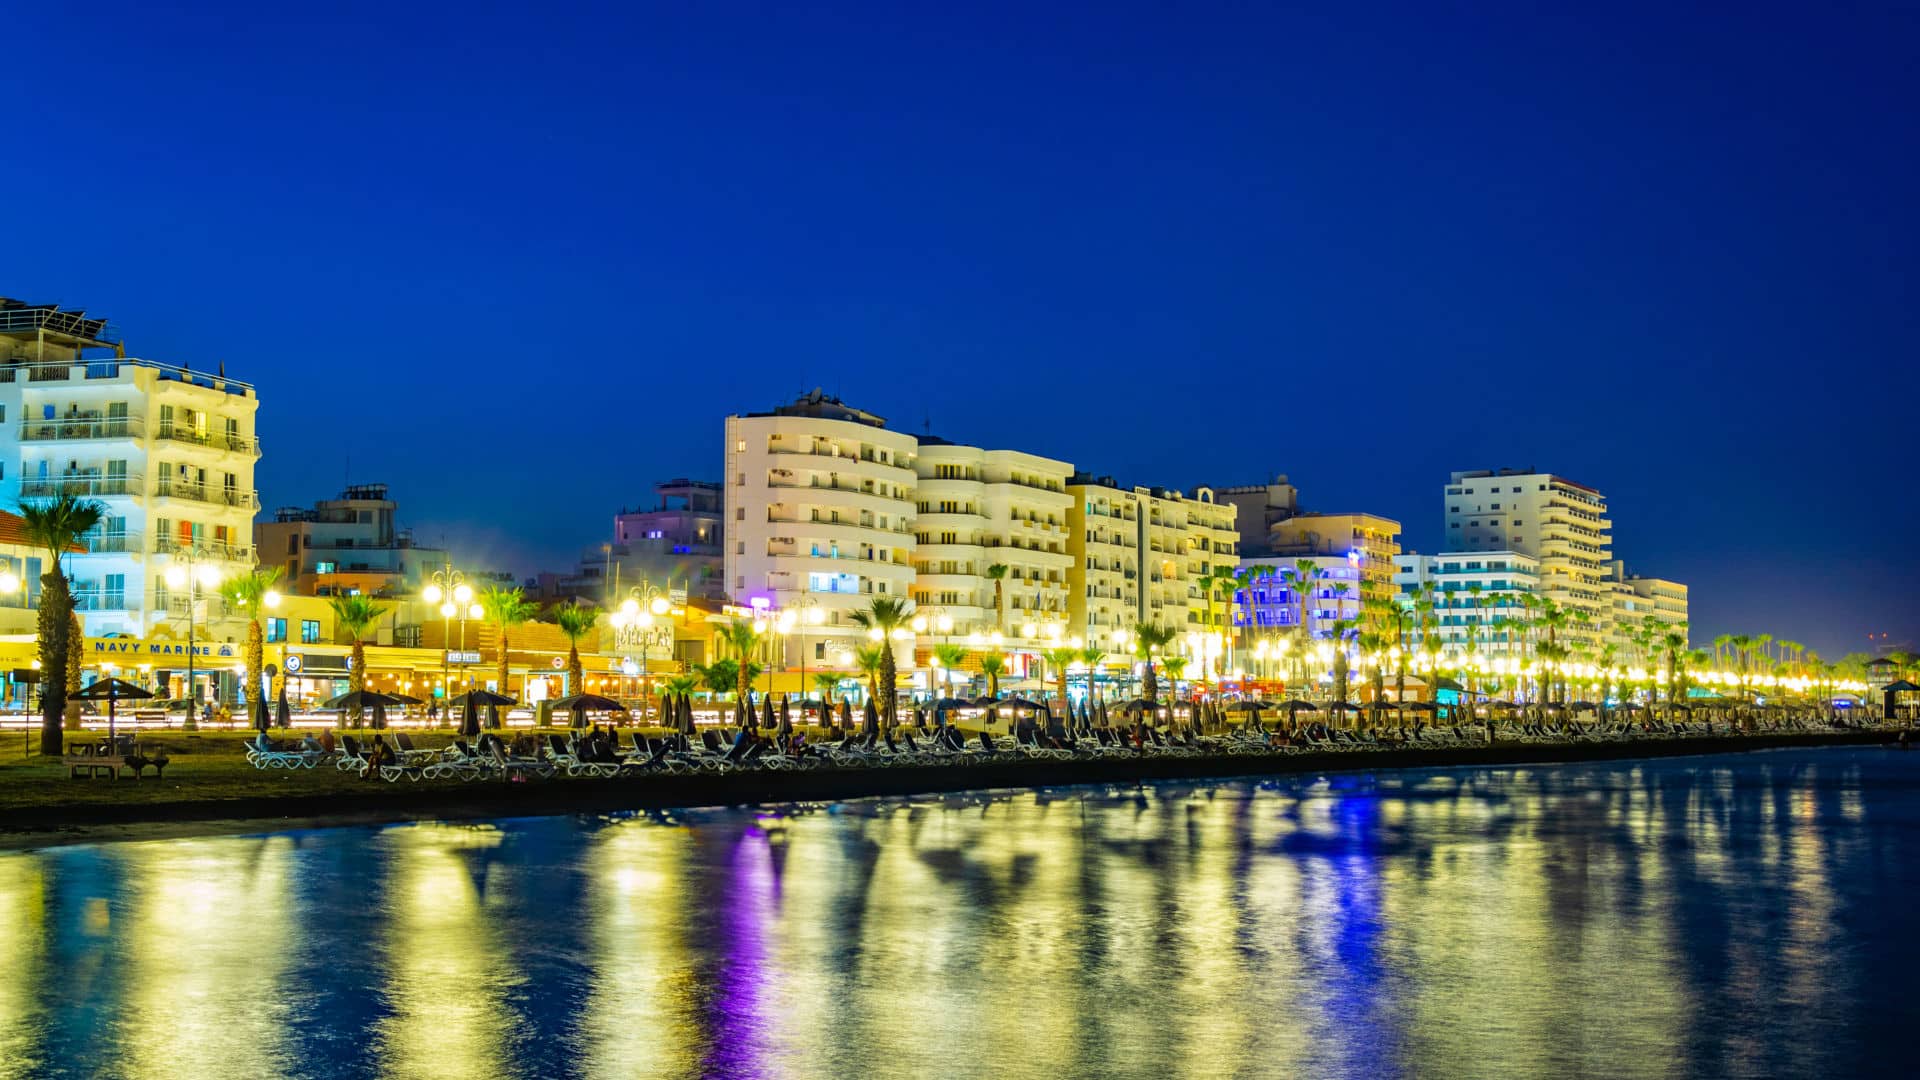 A photo of Larnaca at night time, with buildings and street lights in front a beach with deckchairs.